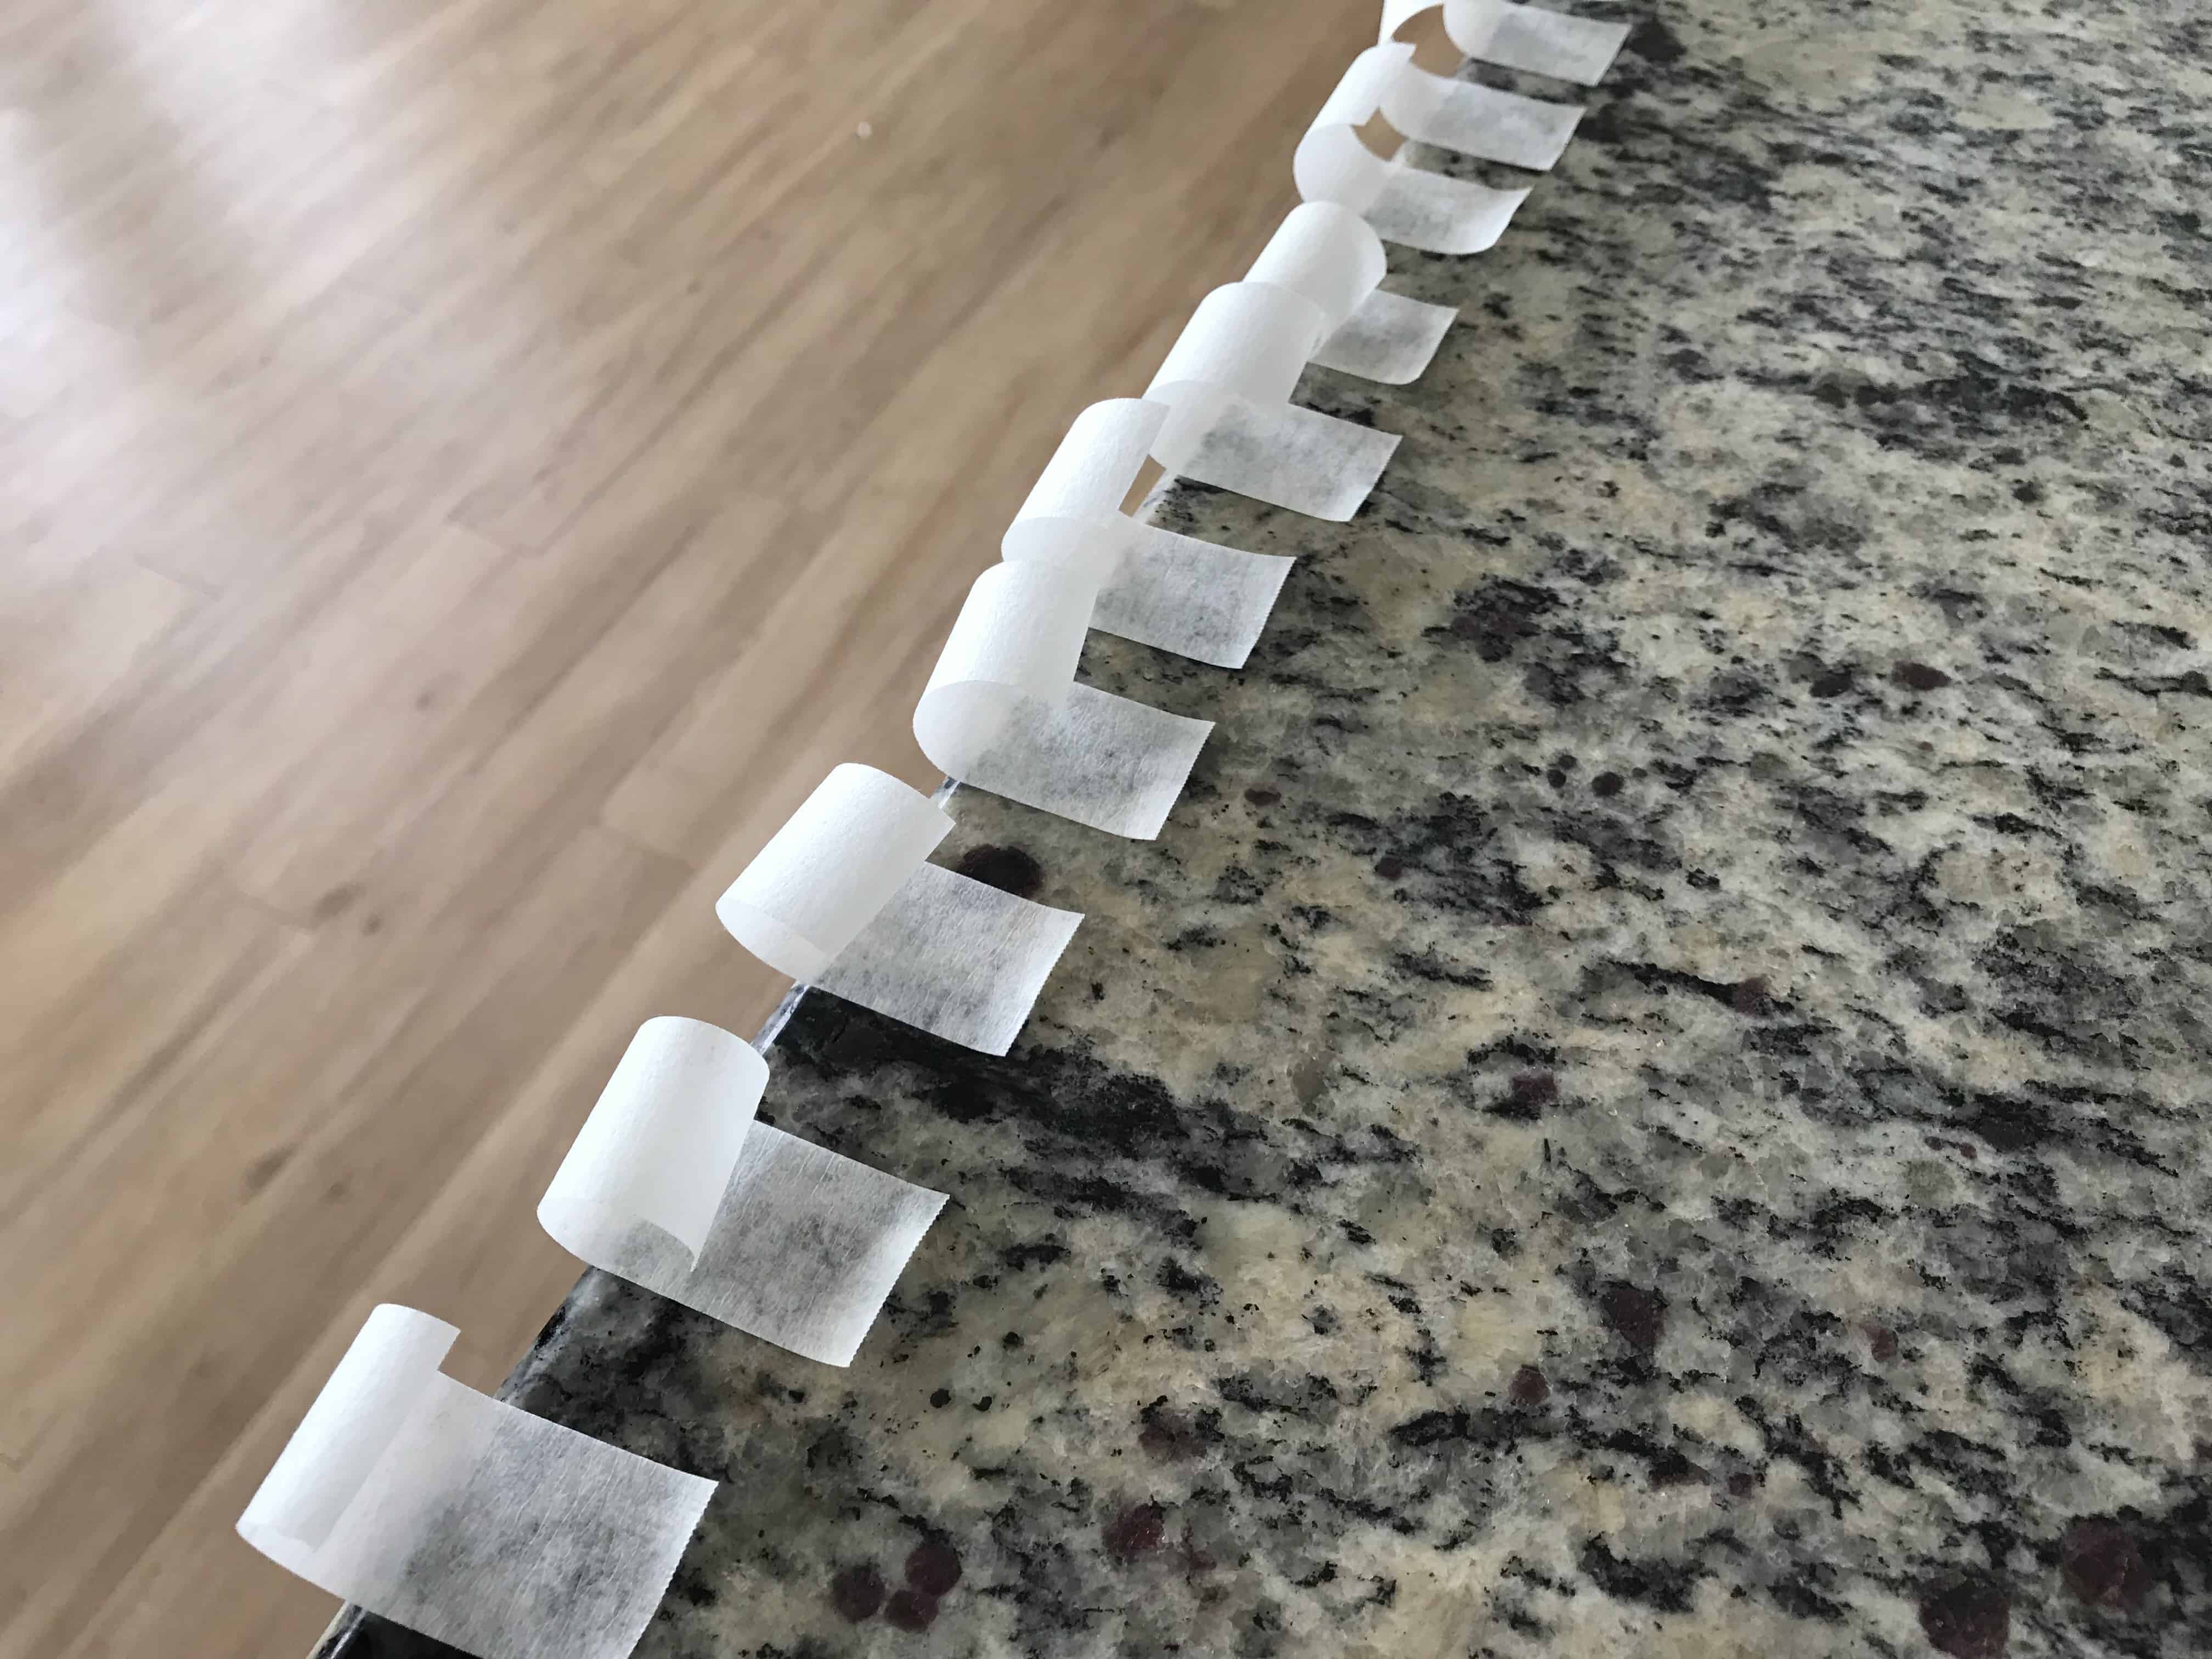 Small pieces of tape stuck to a countertop